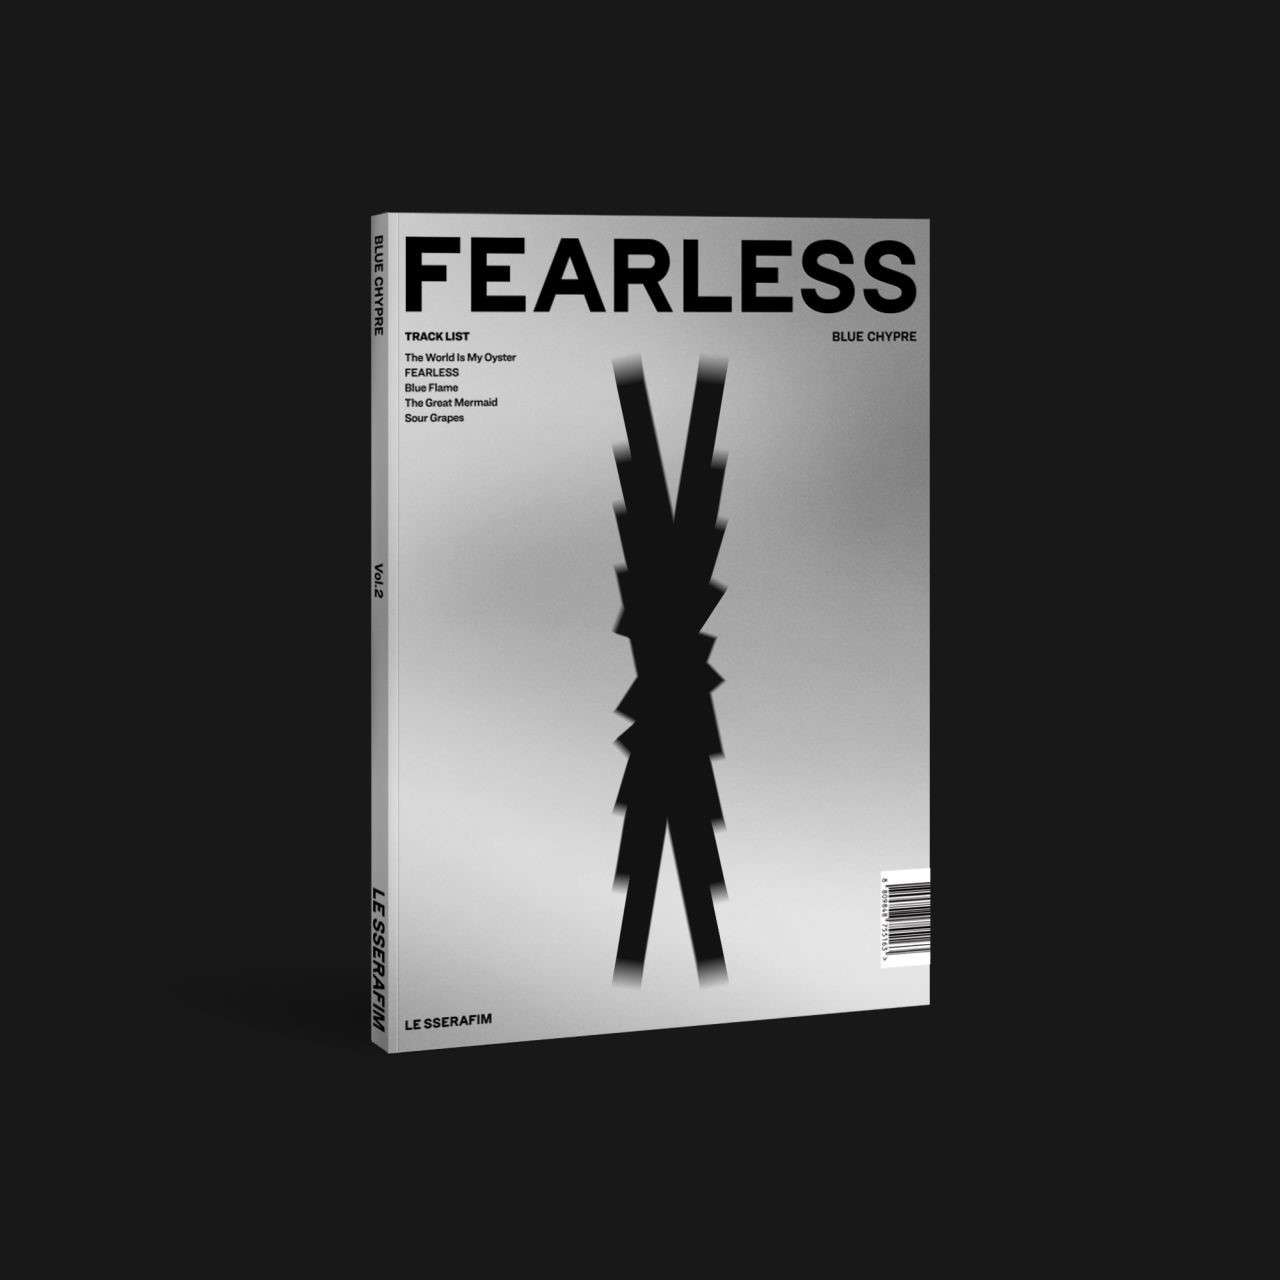 FEARLESS (BLUE CYPHRE)